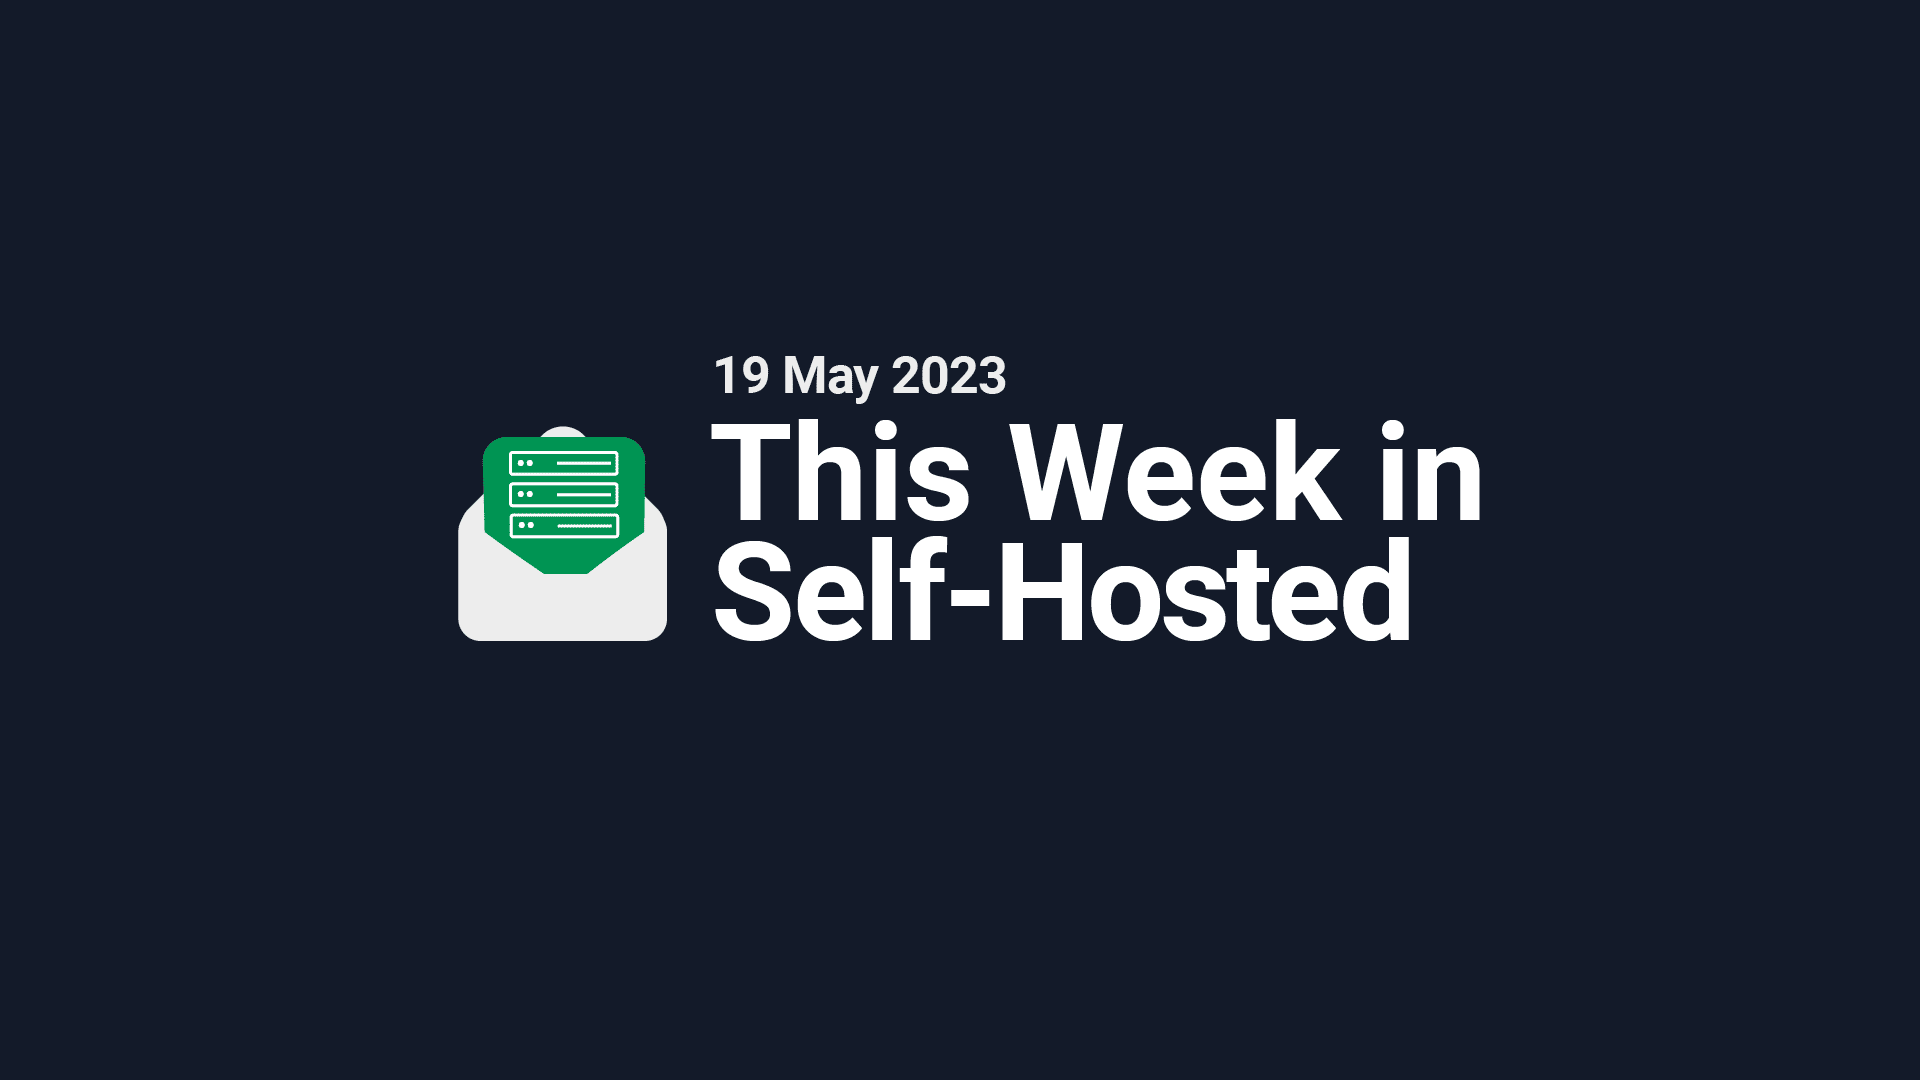 This Week in Self-Hosted (19 May 2023) Post image